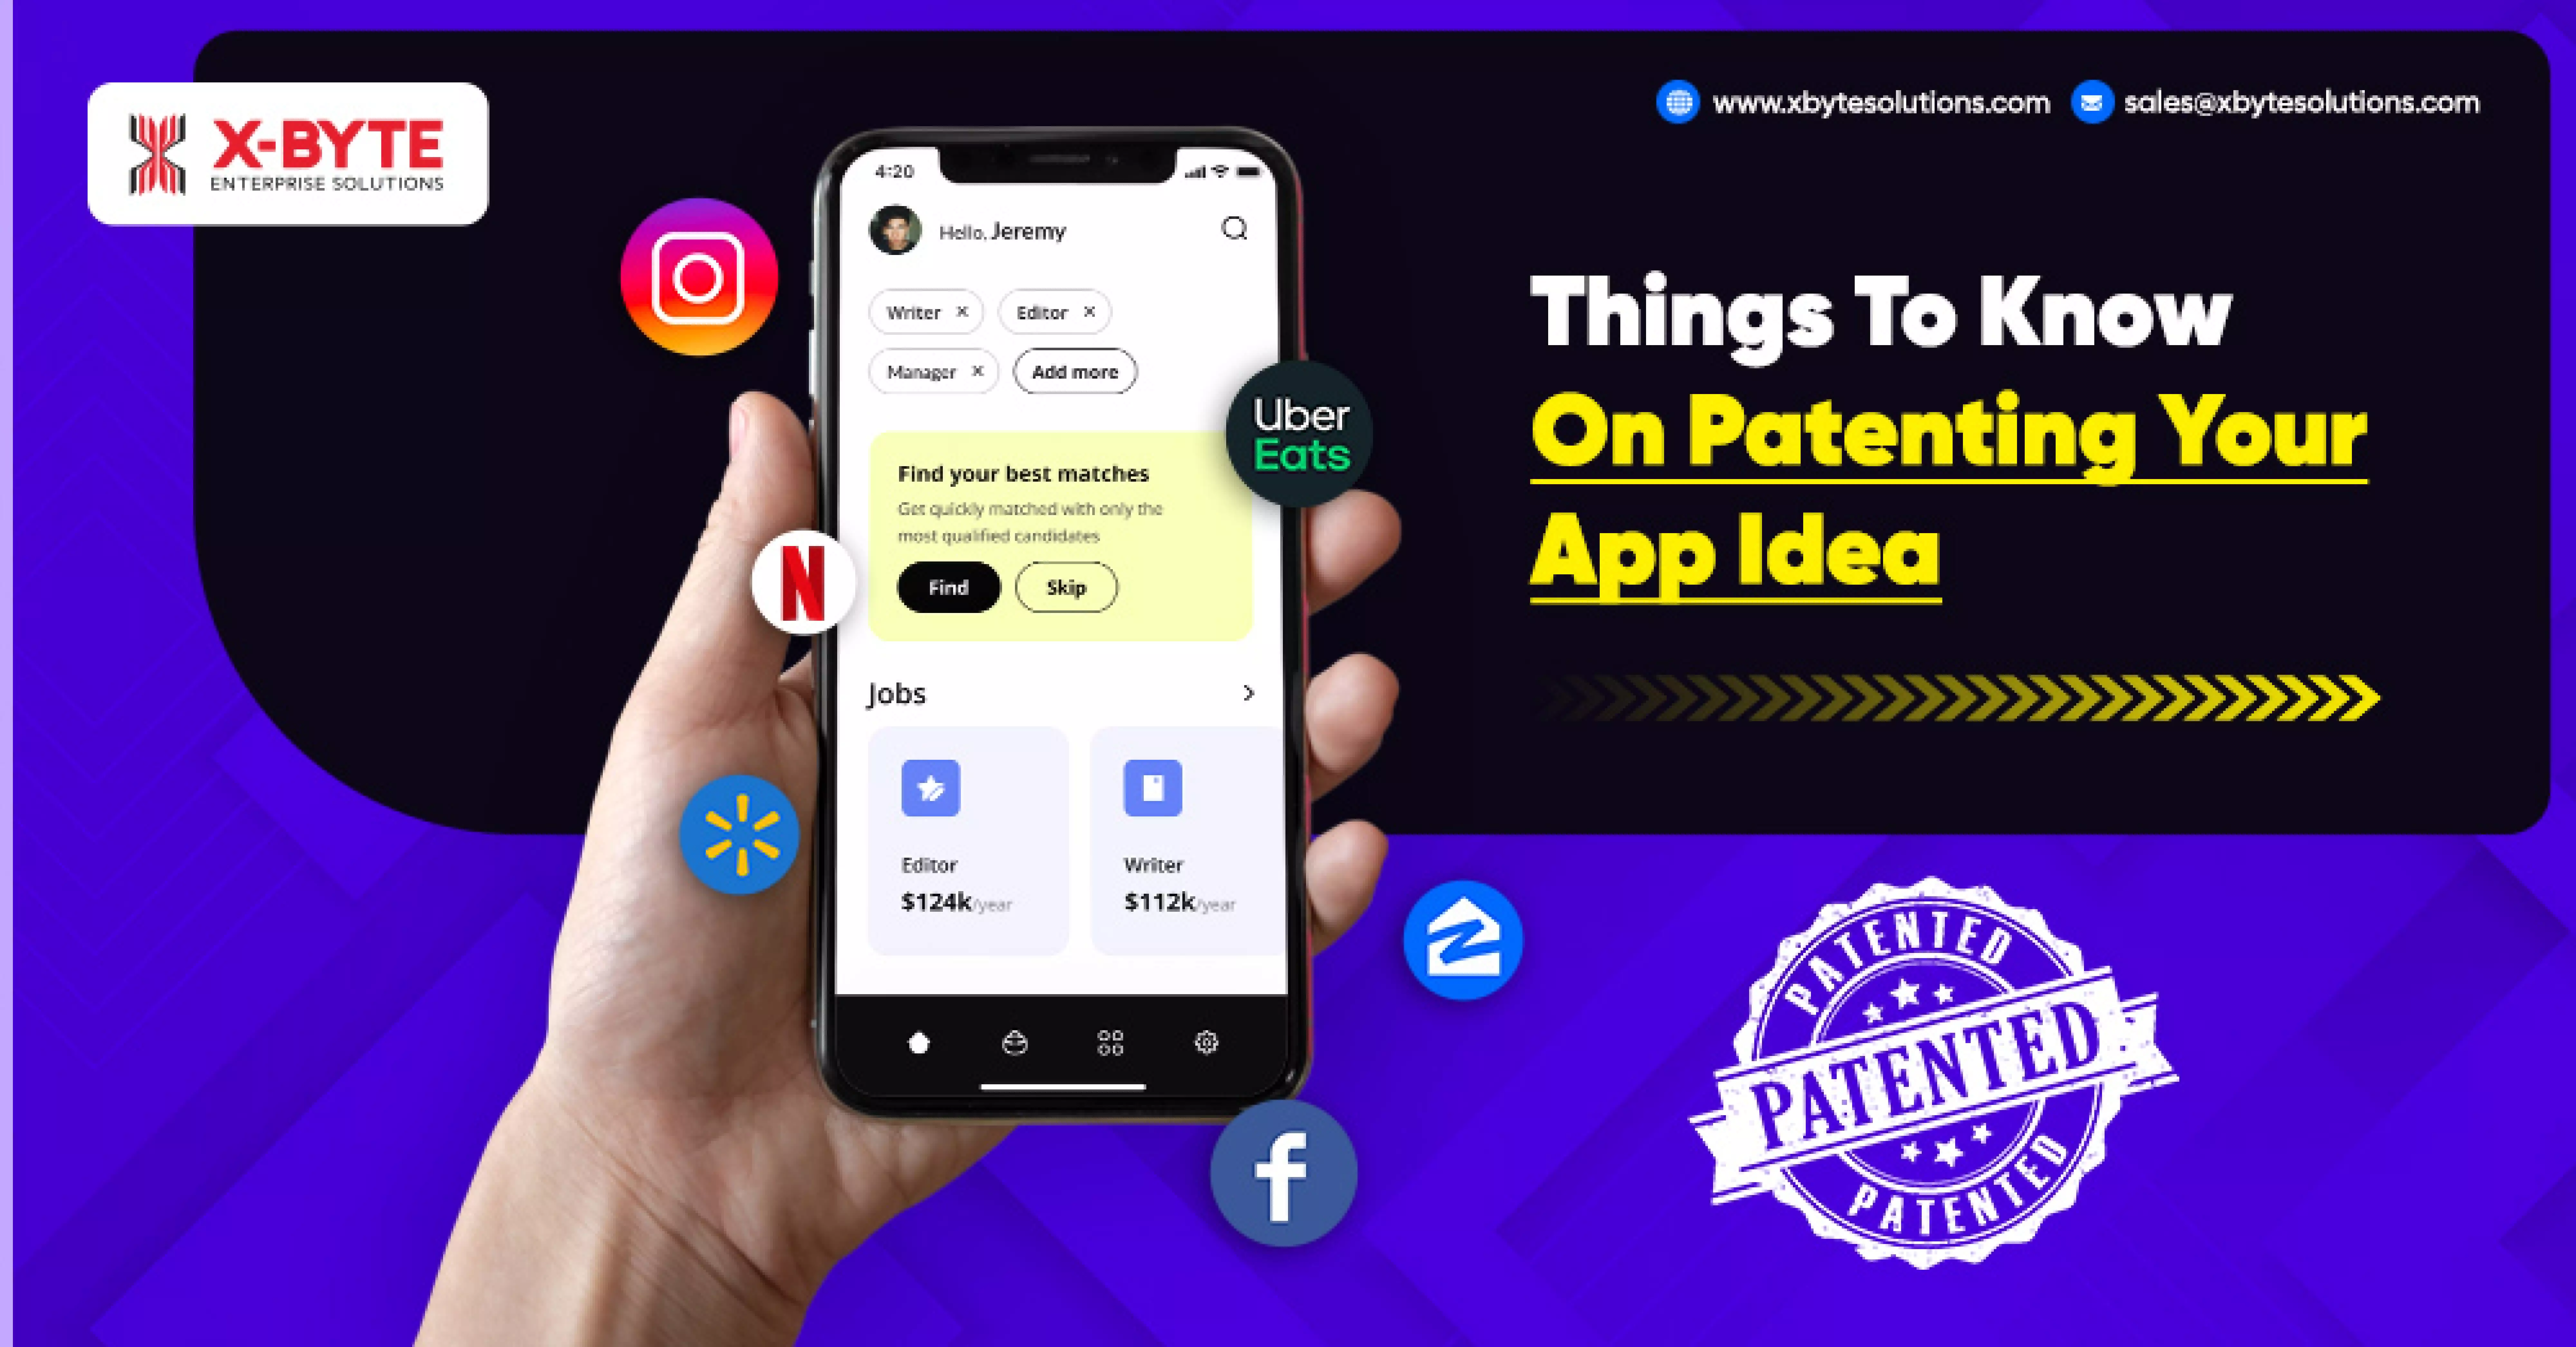 Things To Know On Patenting Your App Idea